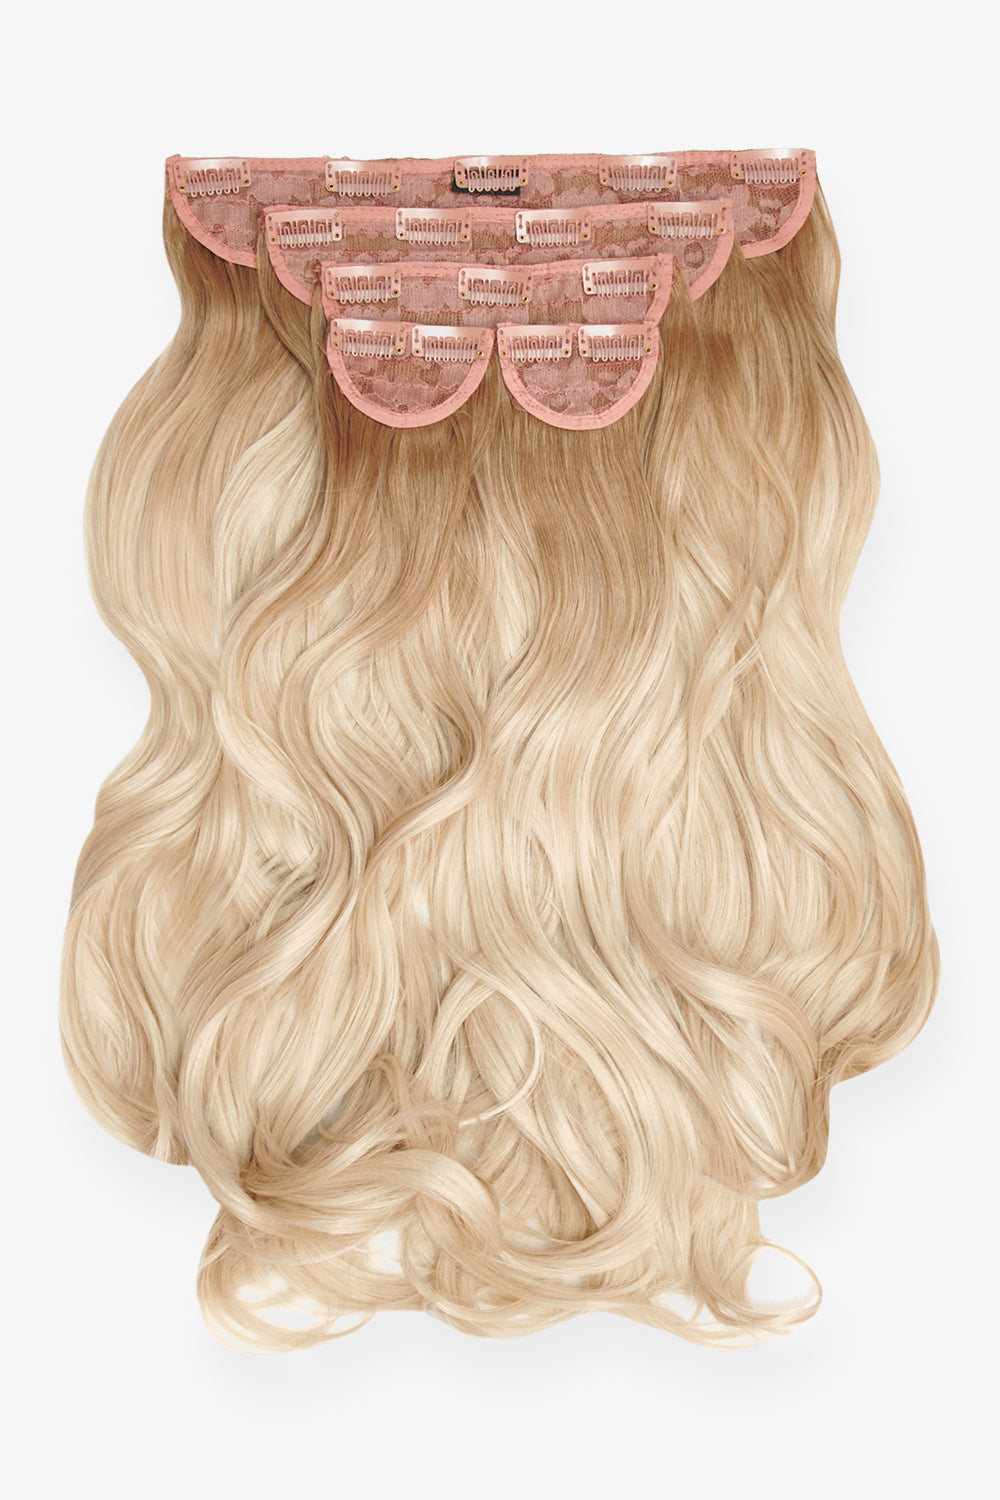 Super Thick 22" 5 Piece Natural Wavy Clip In Hair Extensions - LullaBellz - Rooted Light Blonde